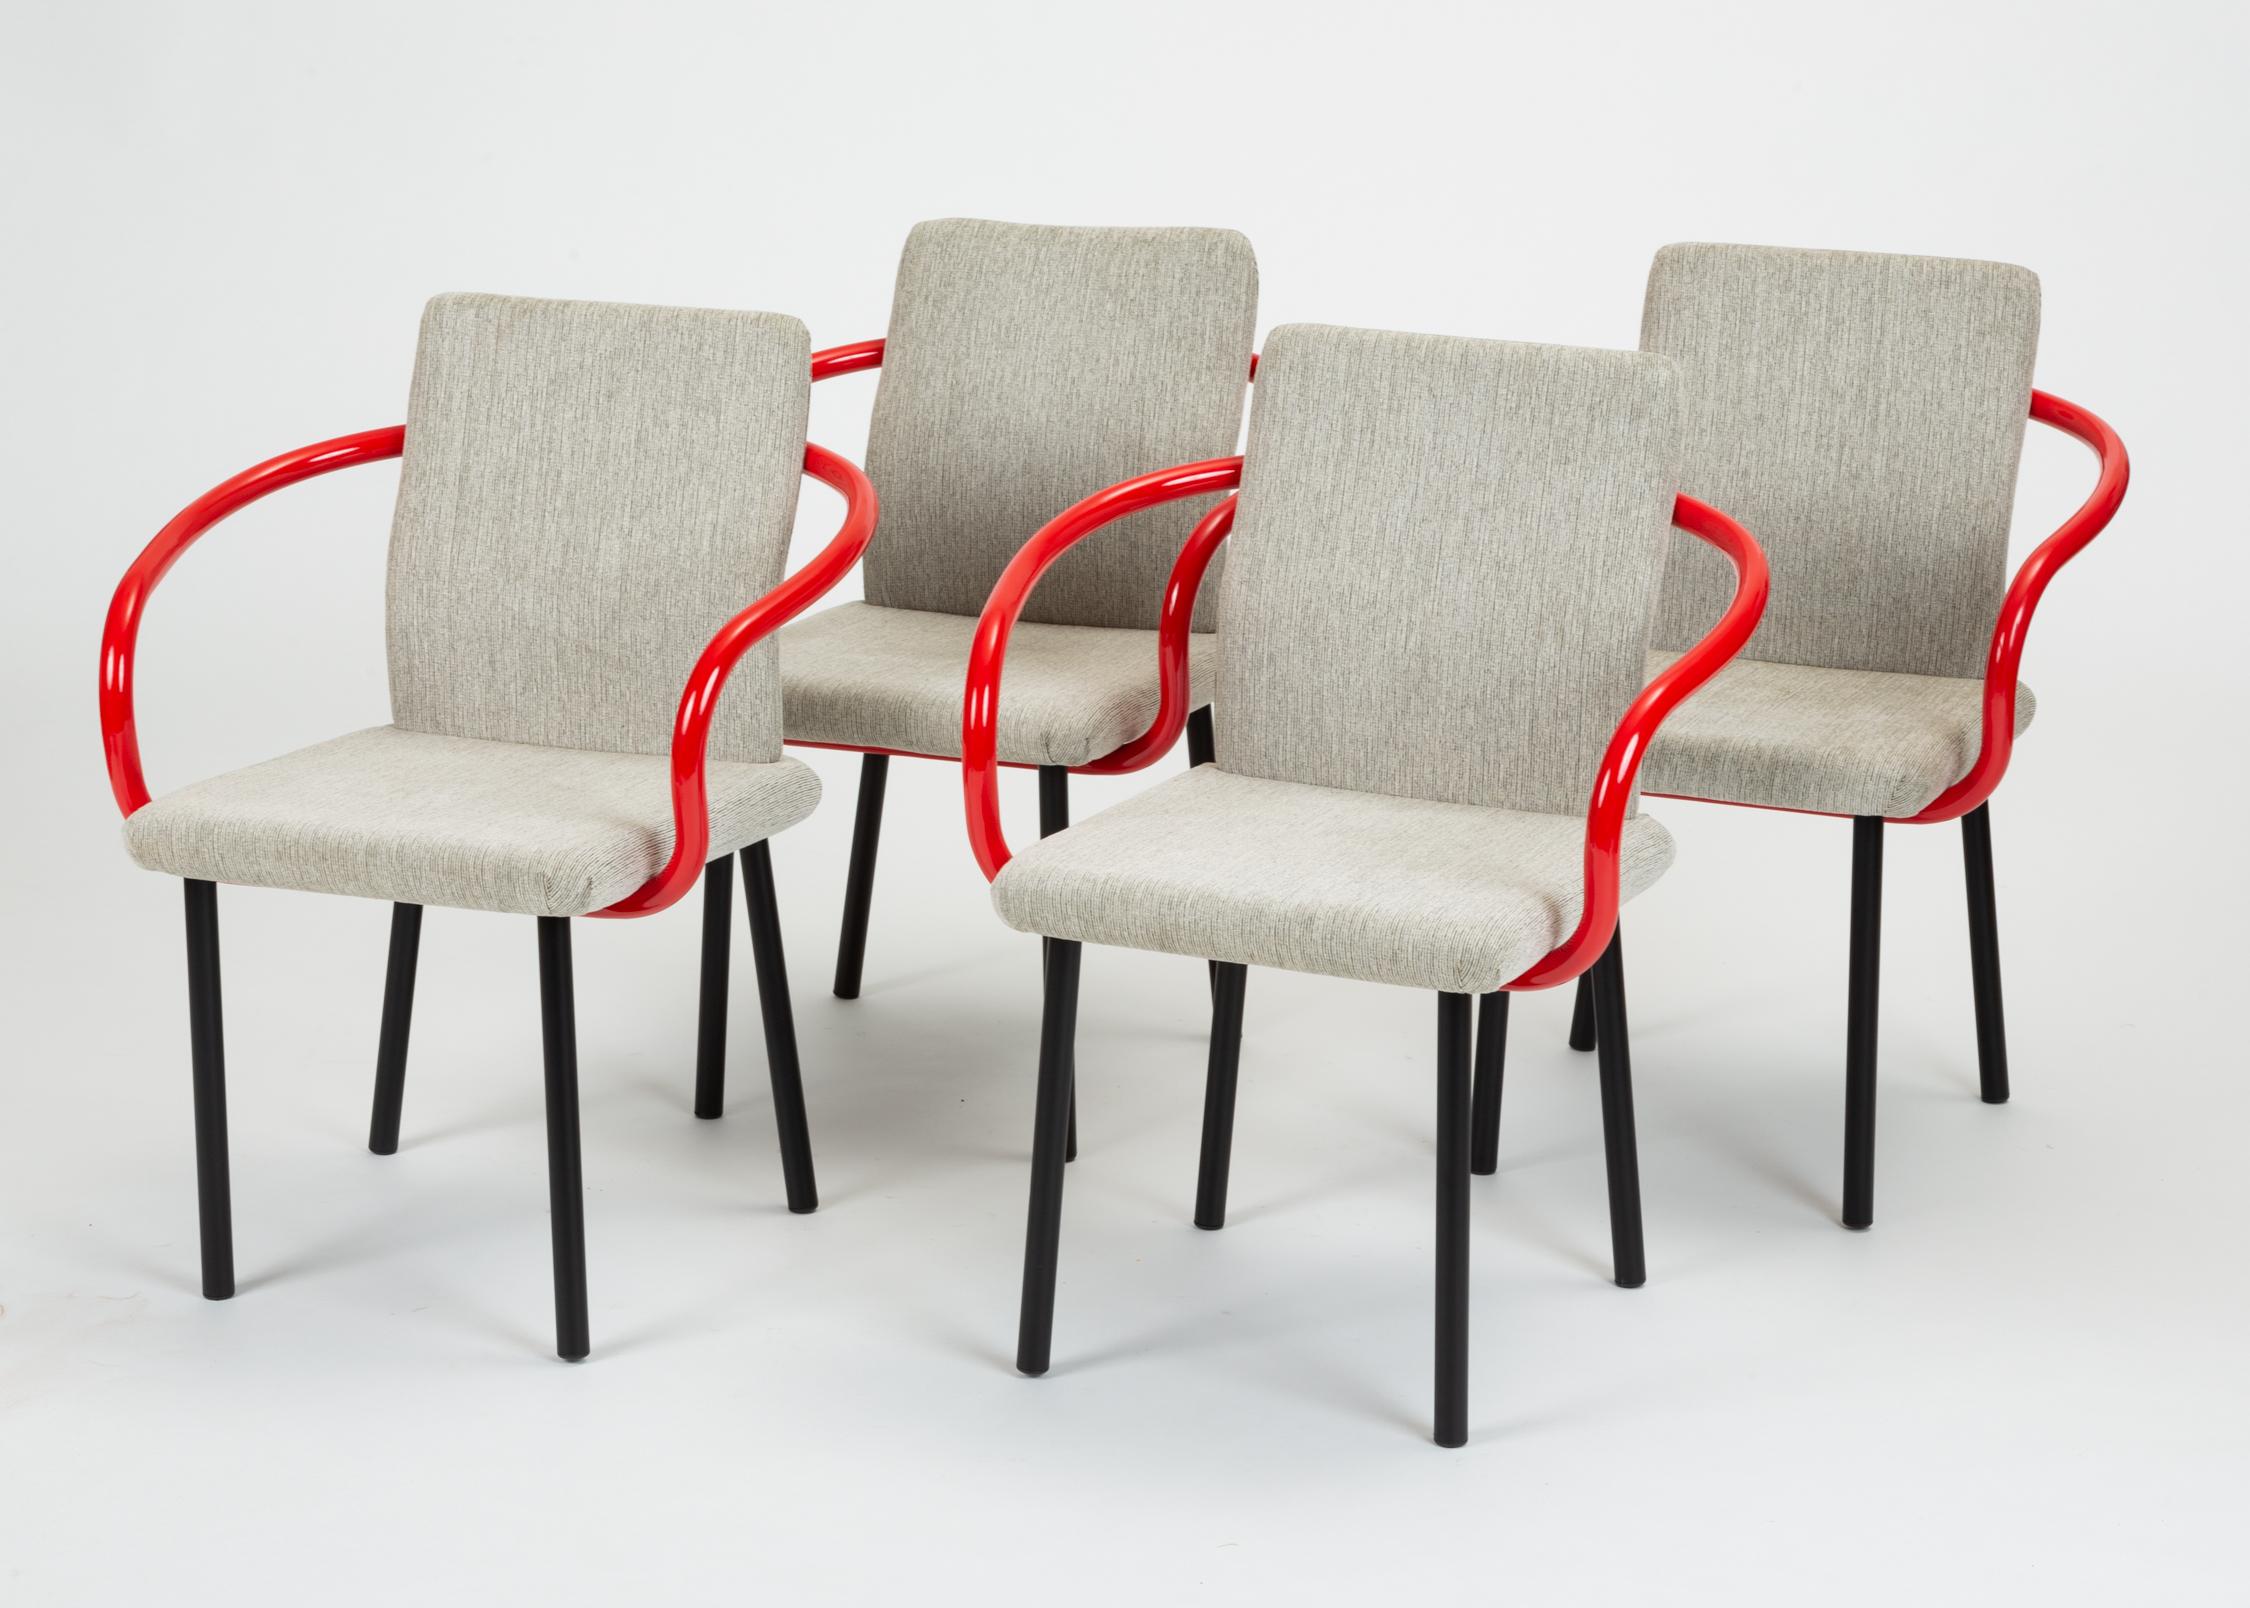 A 1986 design by Ettore Sottsass for Knoll, the Mandarin chair has a curved back- and armrest, upholstered seat, and four round legs in enameled metal. A slight wave in the backrest gives it an ergonomic swell. The chair plays equally to Sottsass’